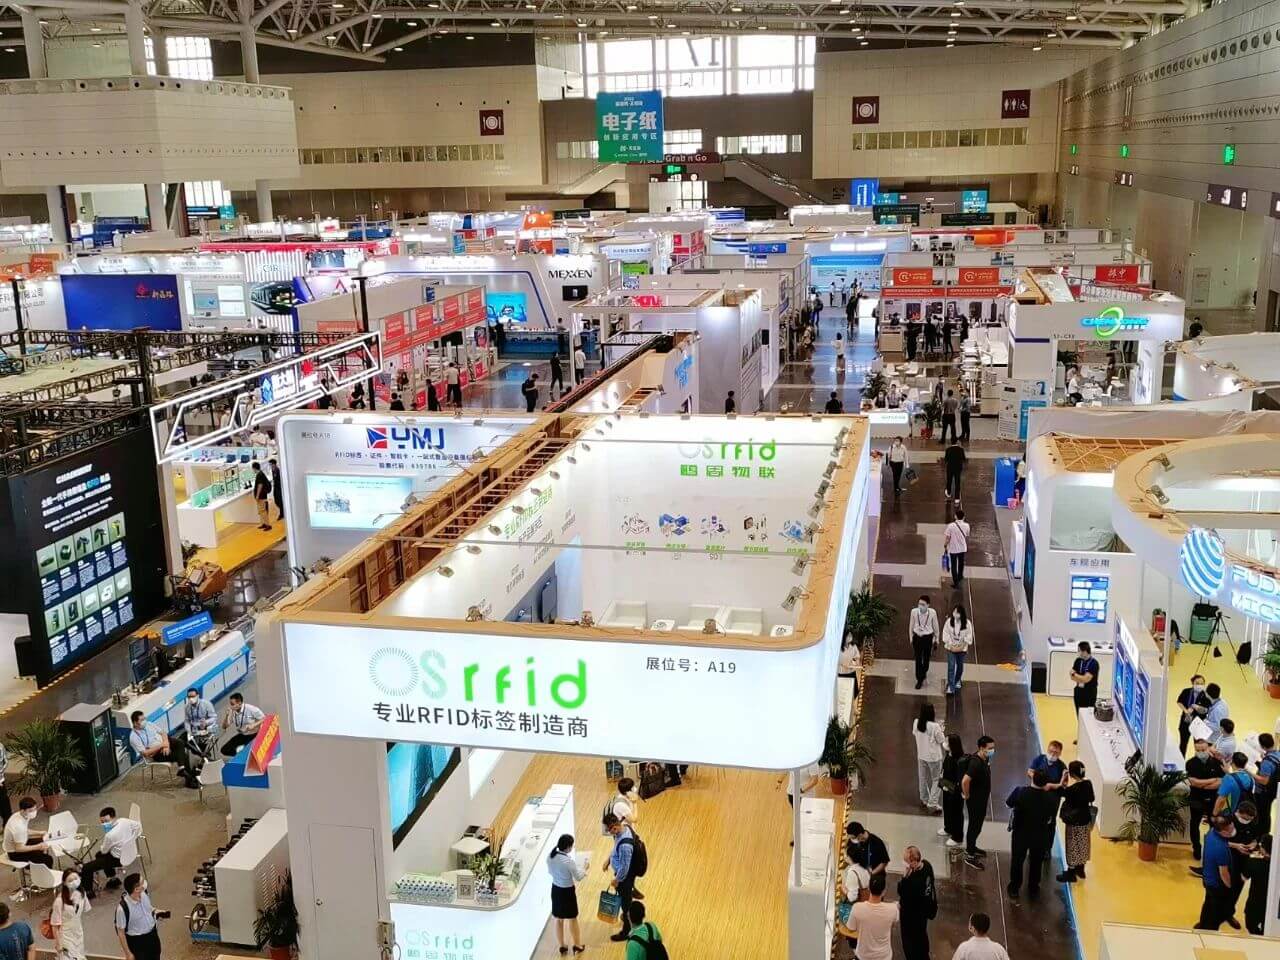 As one of the 11 thematic exhibitions in the Bao'an exhibition area of the 24th China Hi-Tech Fair 